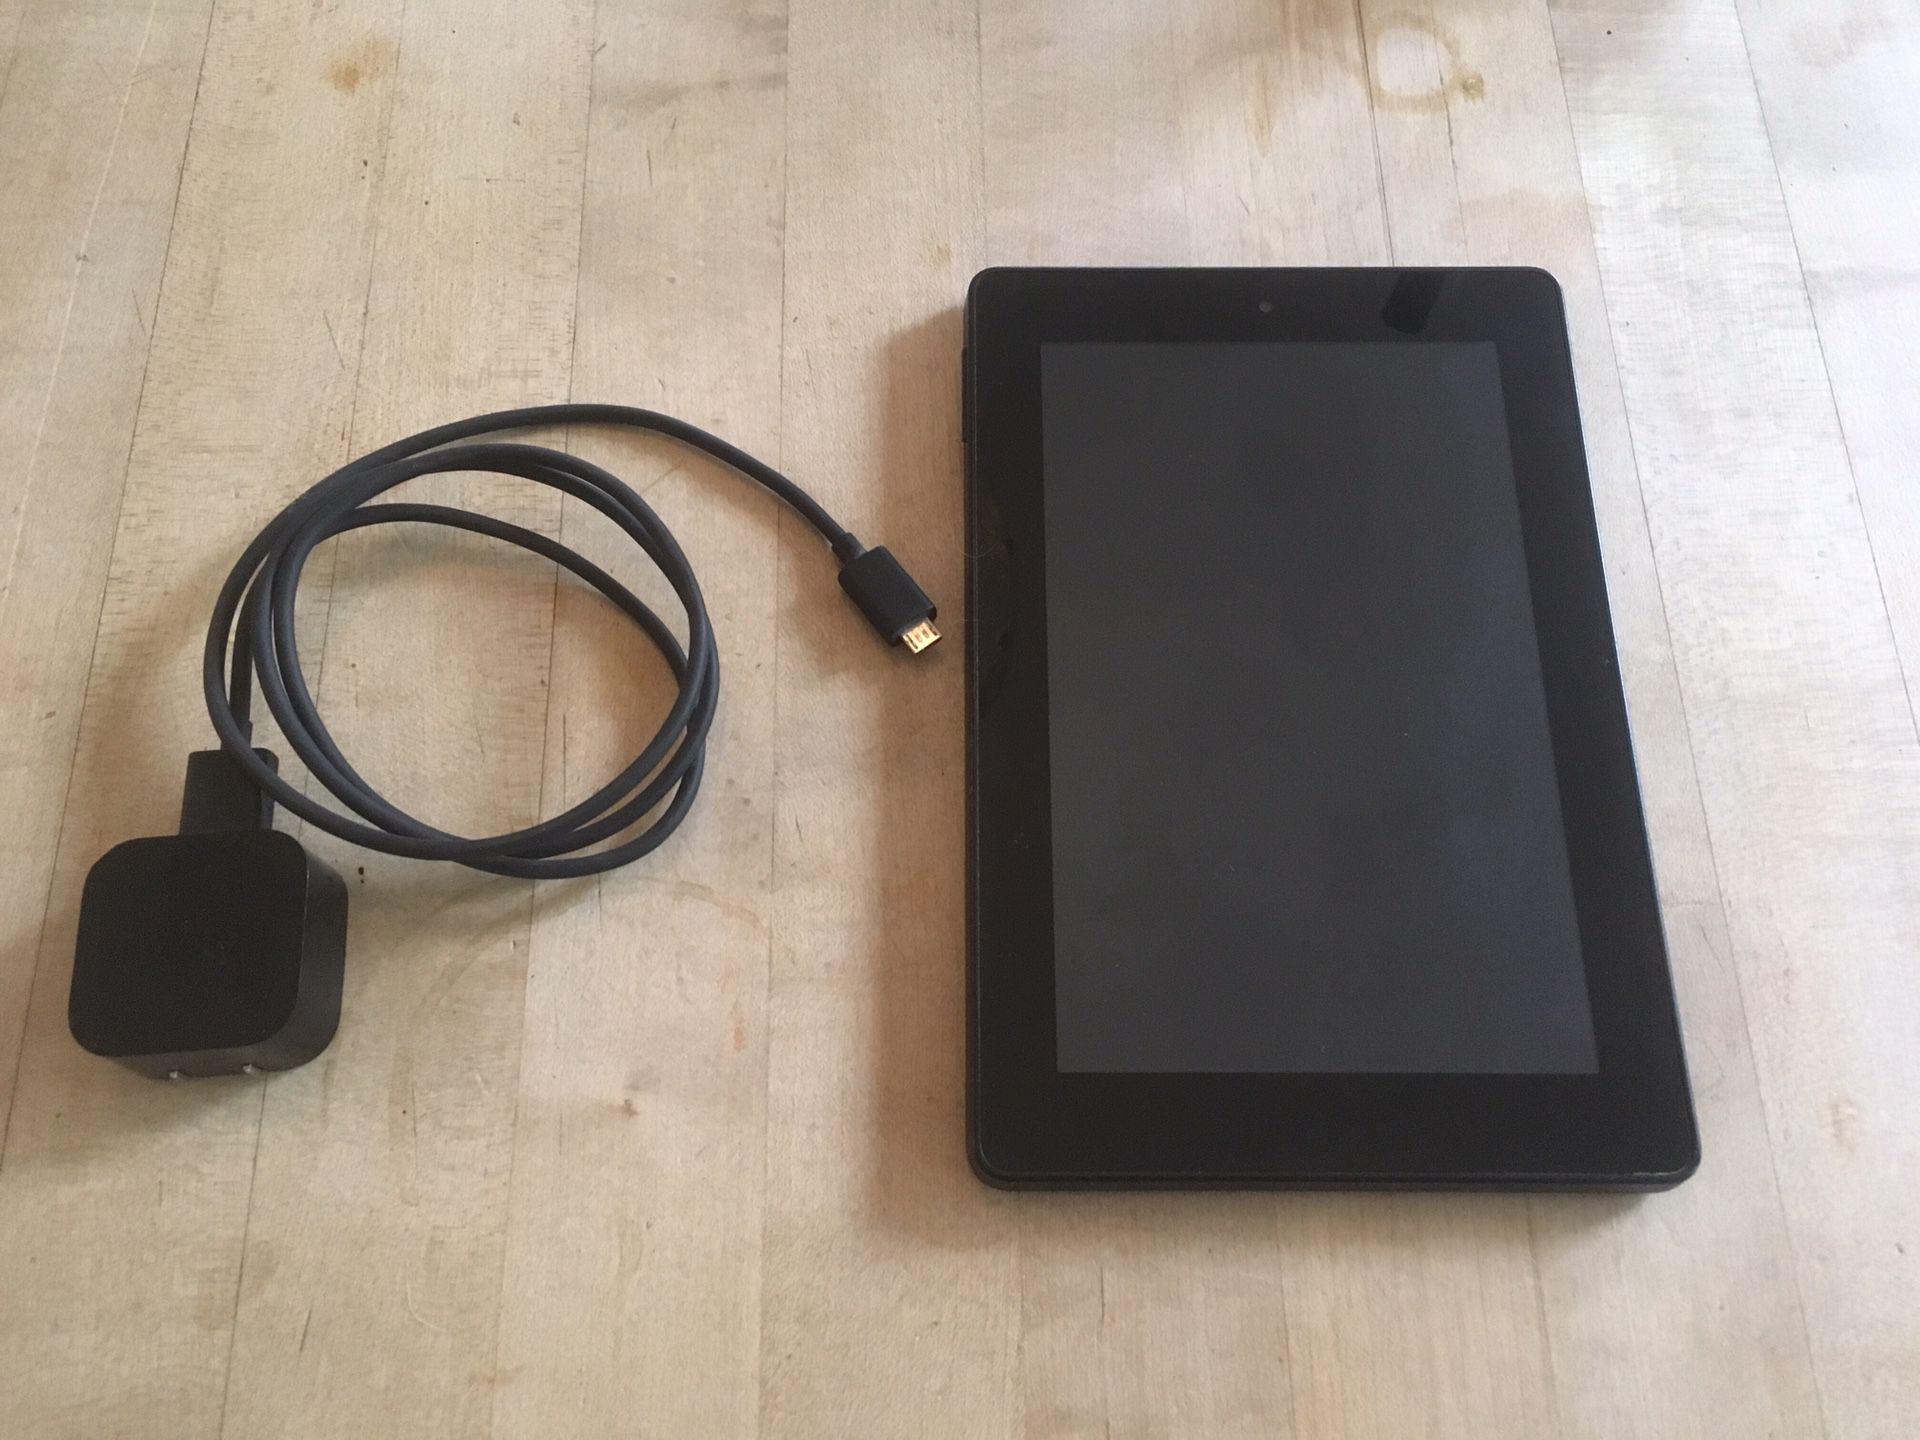 Kindle Fire HD 7 (4th generation)